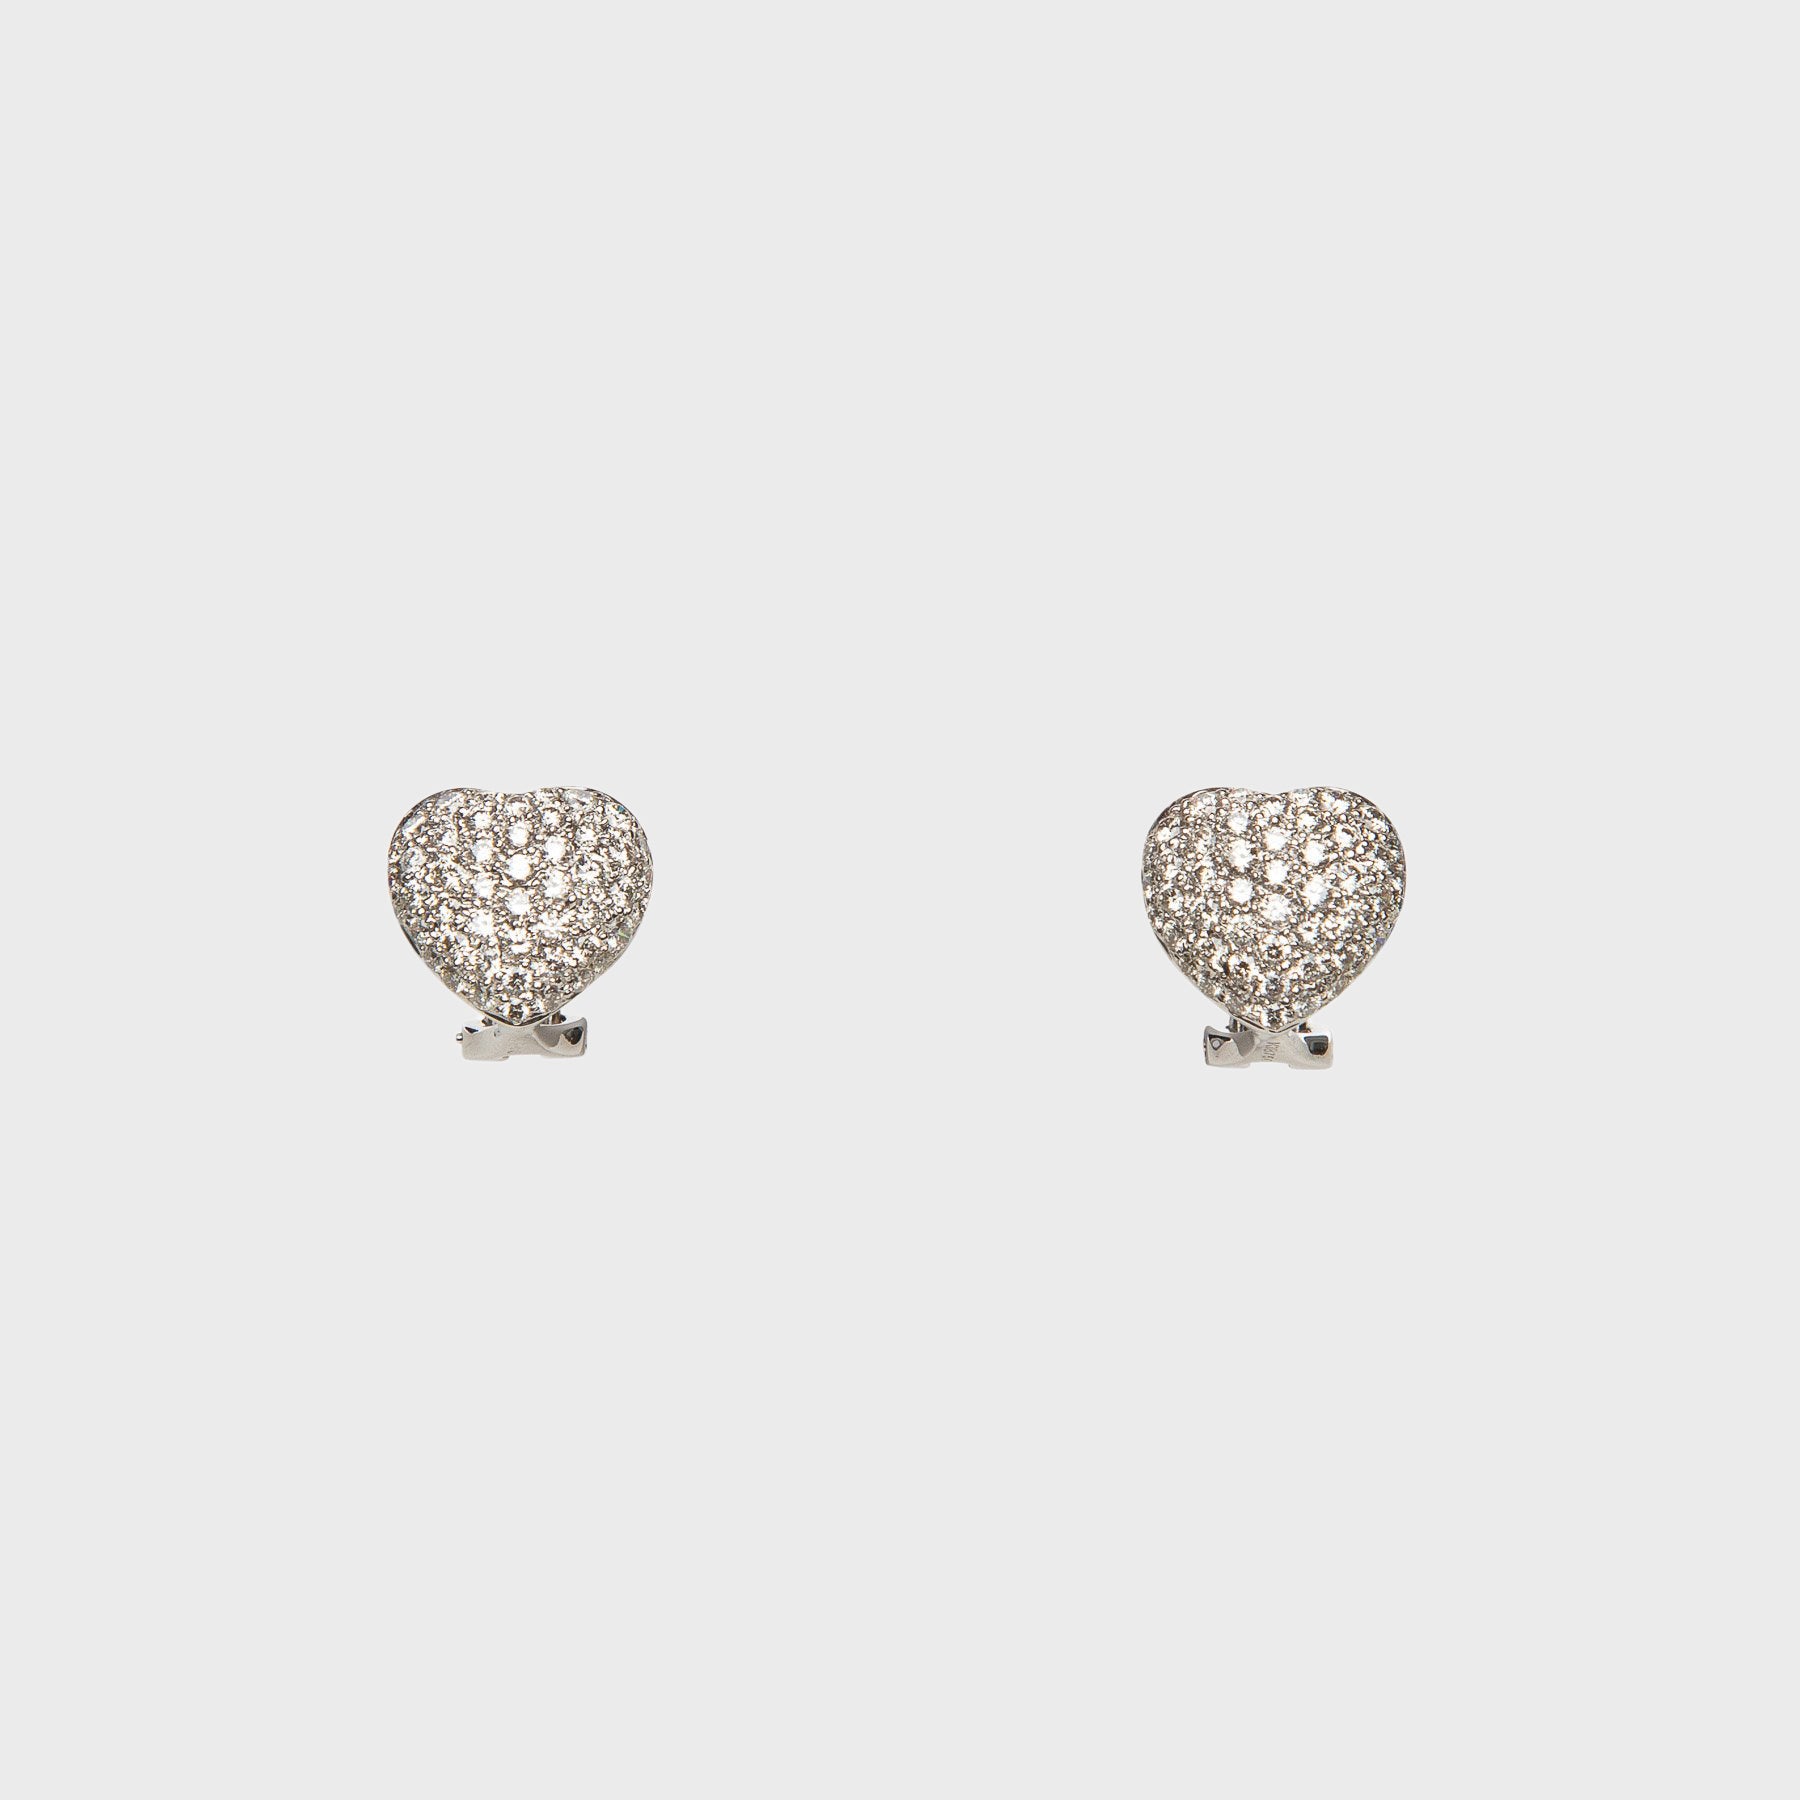 MAXFIELD PRIVATE COLLECTION | DIAMOND HEART EARRINGS